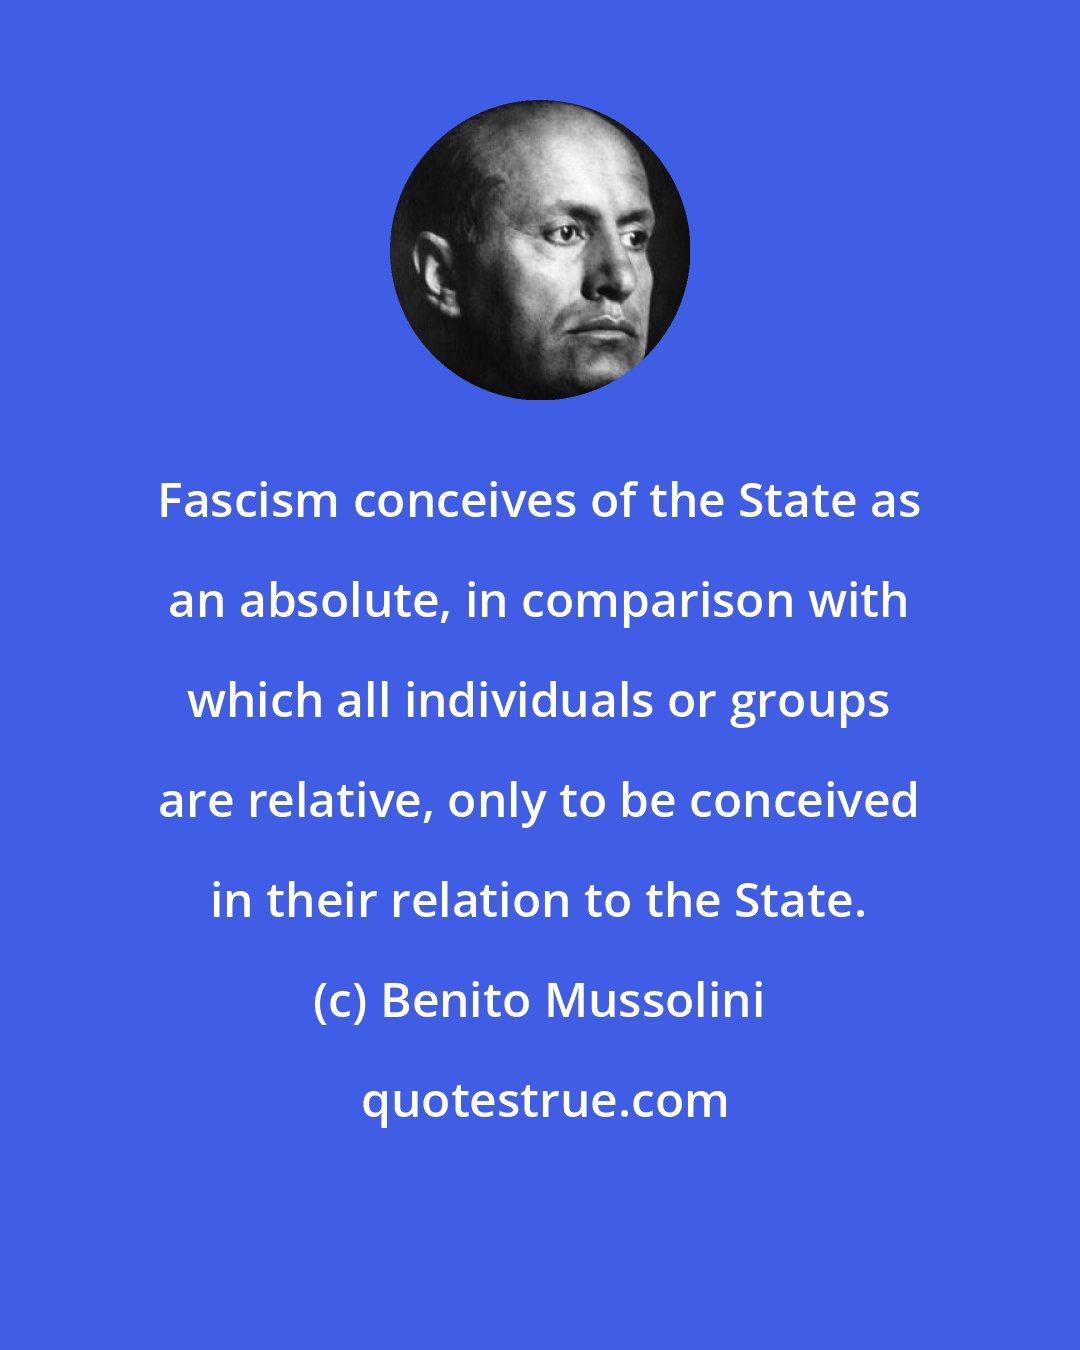 Benito Mussolini: Fascism conceives of the State as an absolute, in comparison with which all individuals or groups are relative, only to be conceived in their relation to the State.